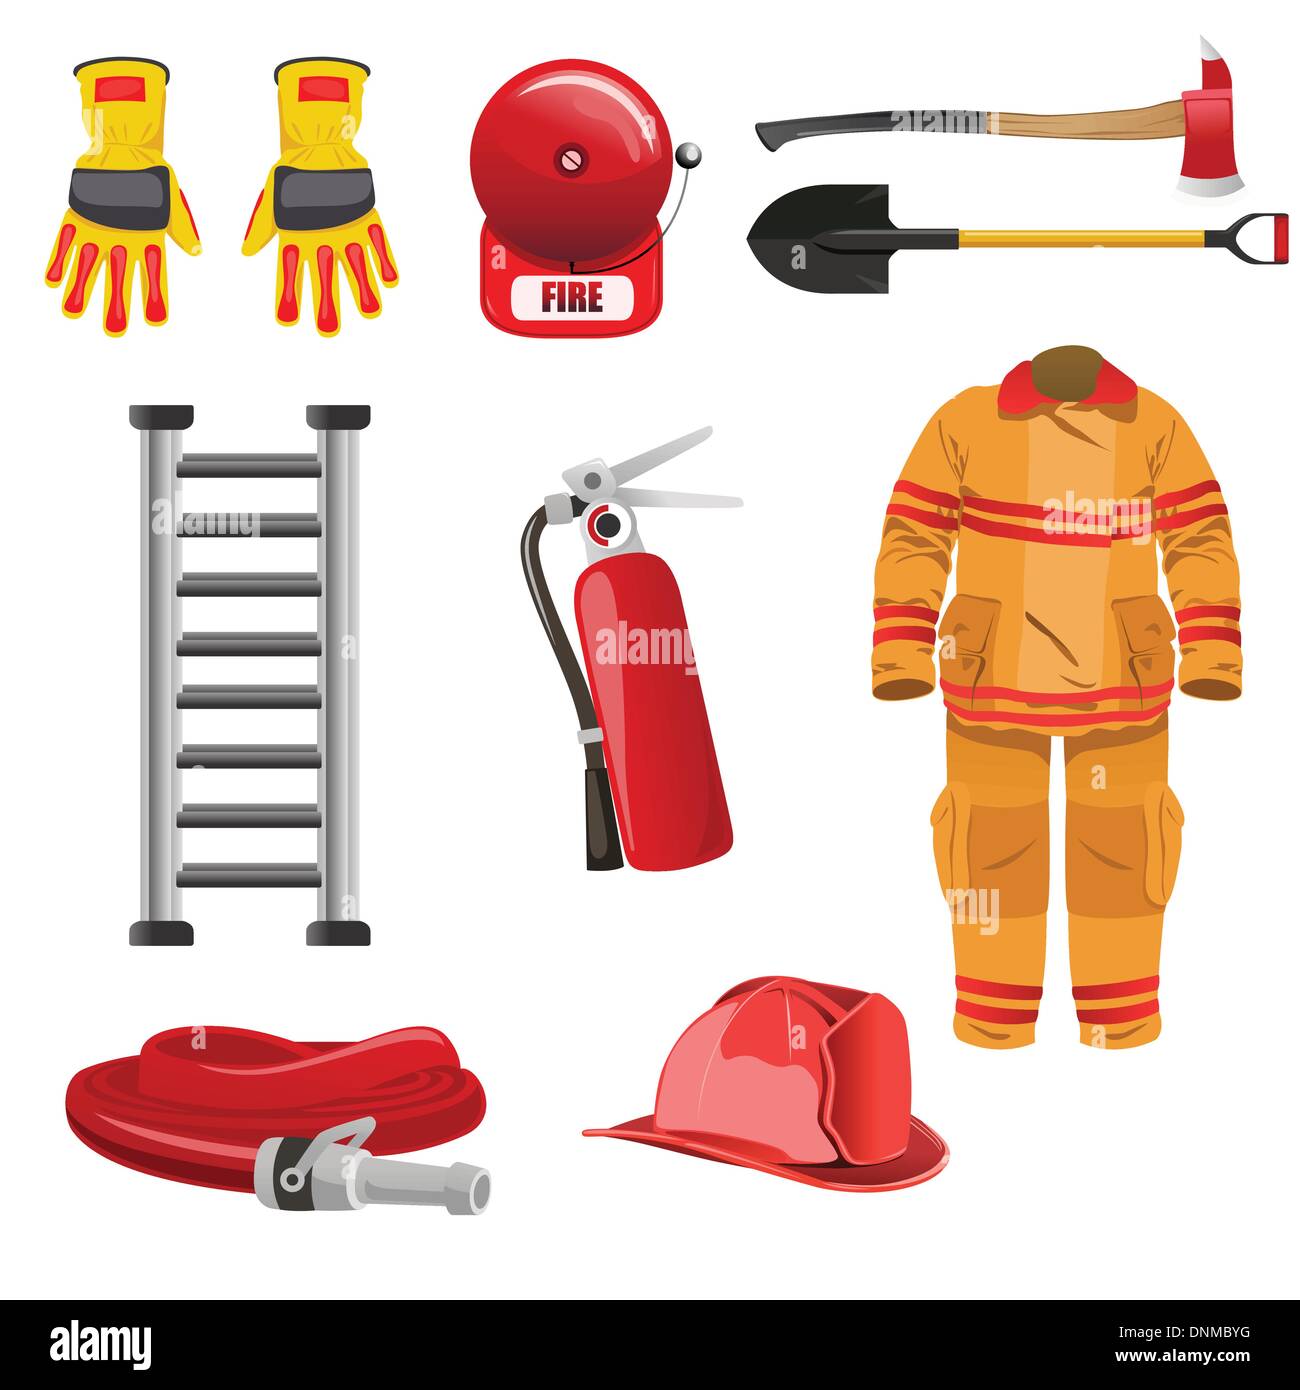 A vector illustration of firefighters icons Stock Vector